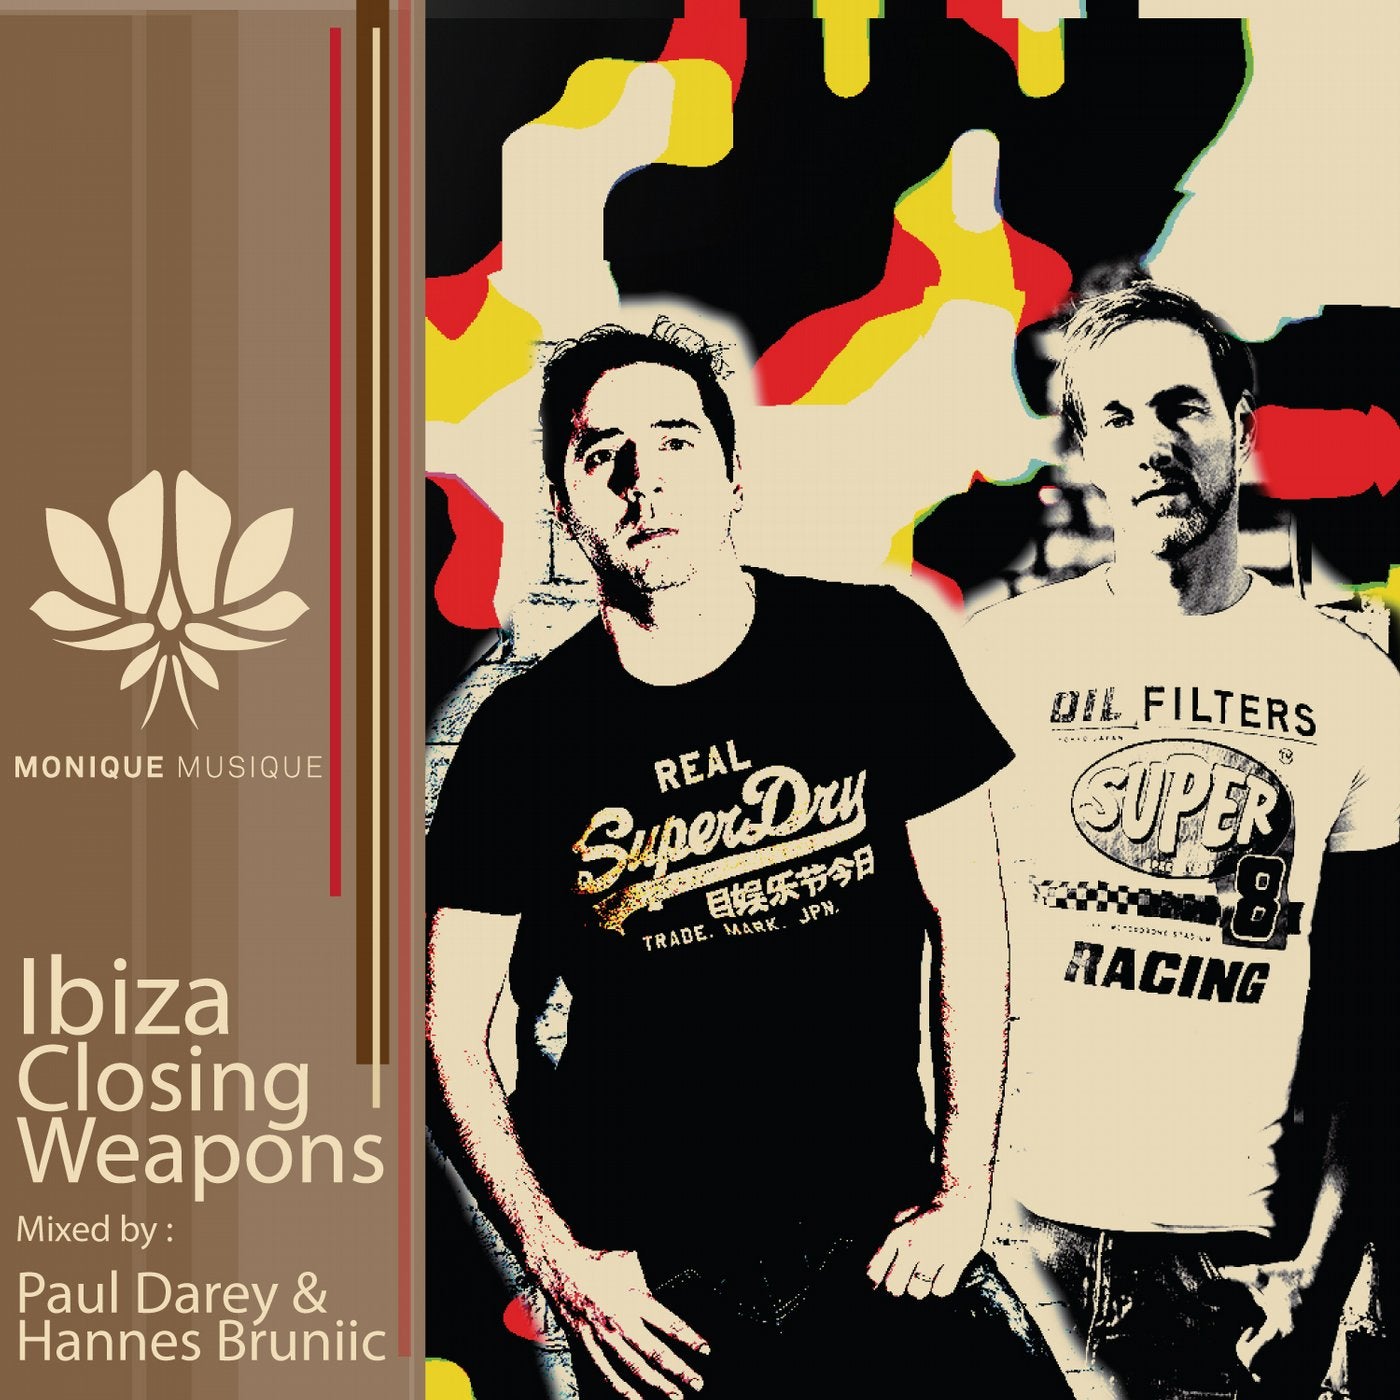 Ibiza Closing Weapons Mixed By : Paul Darey & Hannes Bruniic